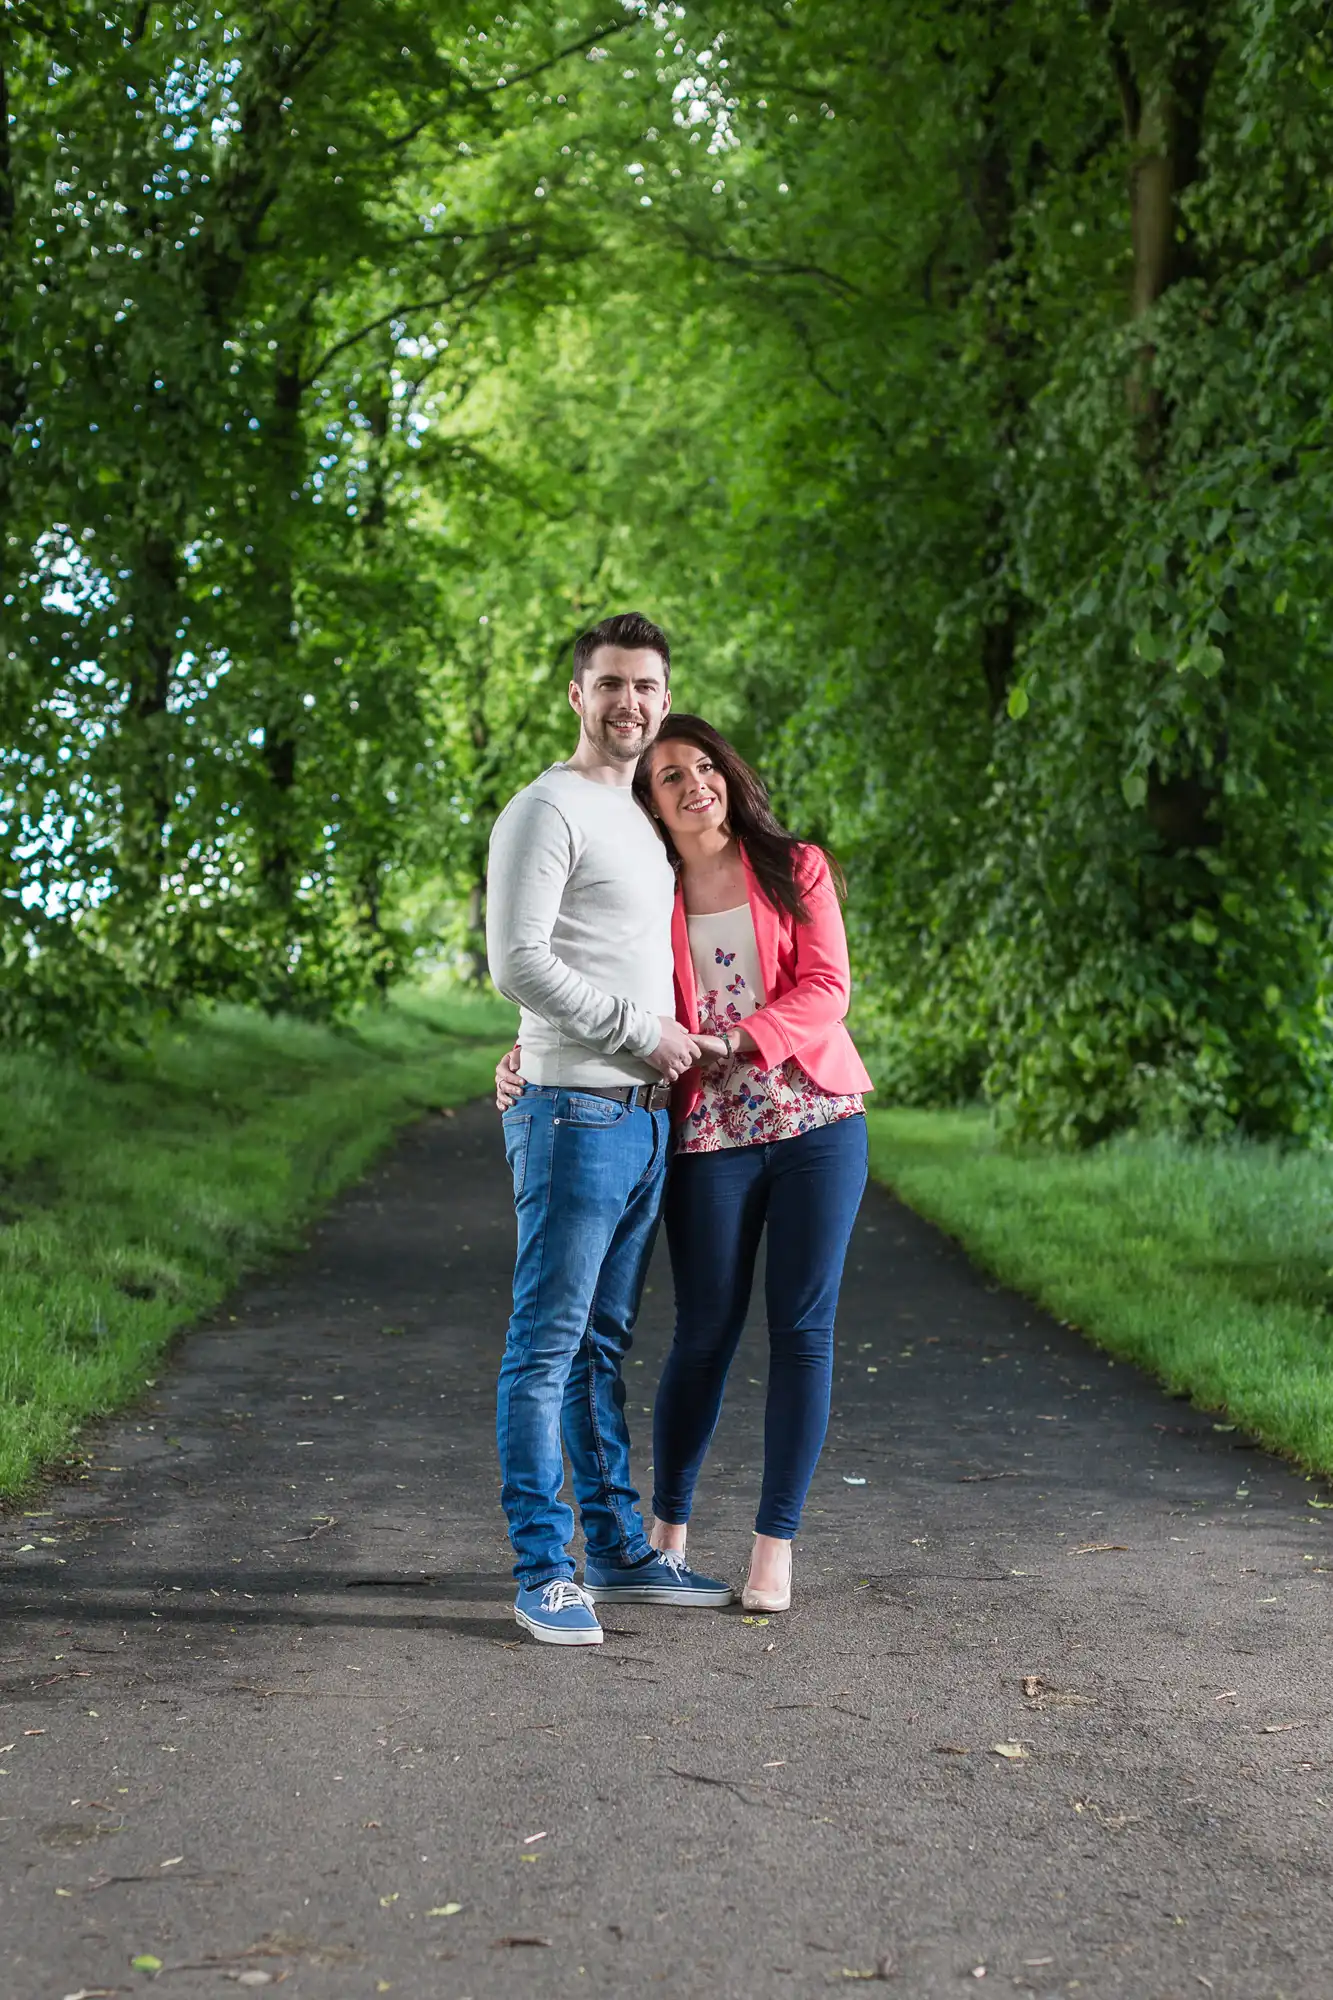 A couple embracing and smiling on a tree-lined path.